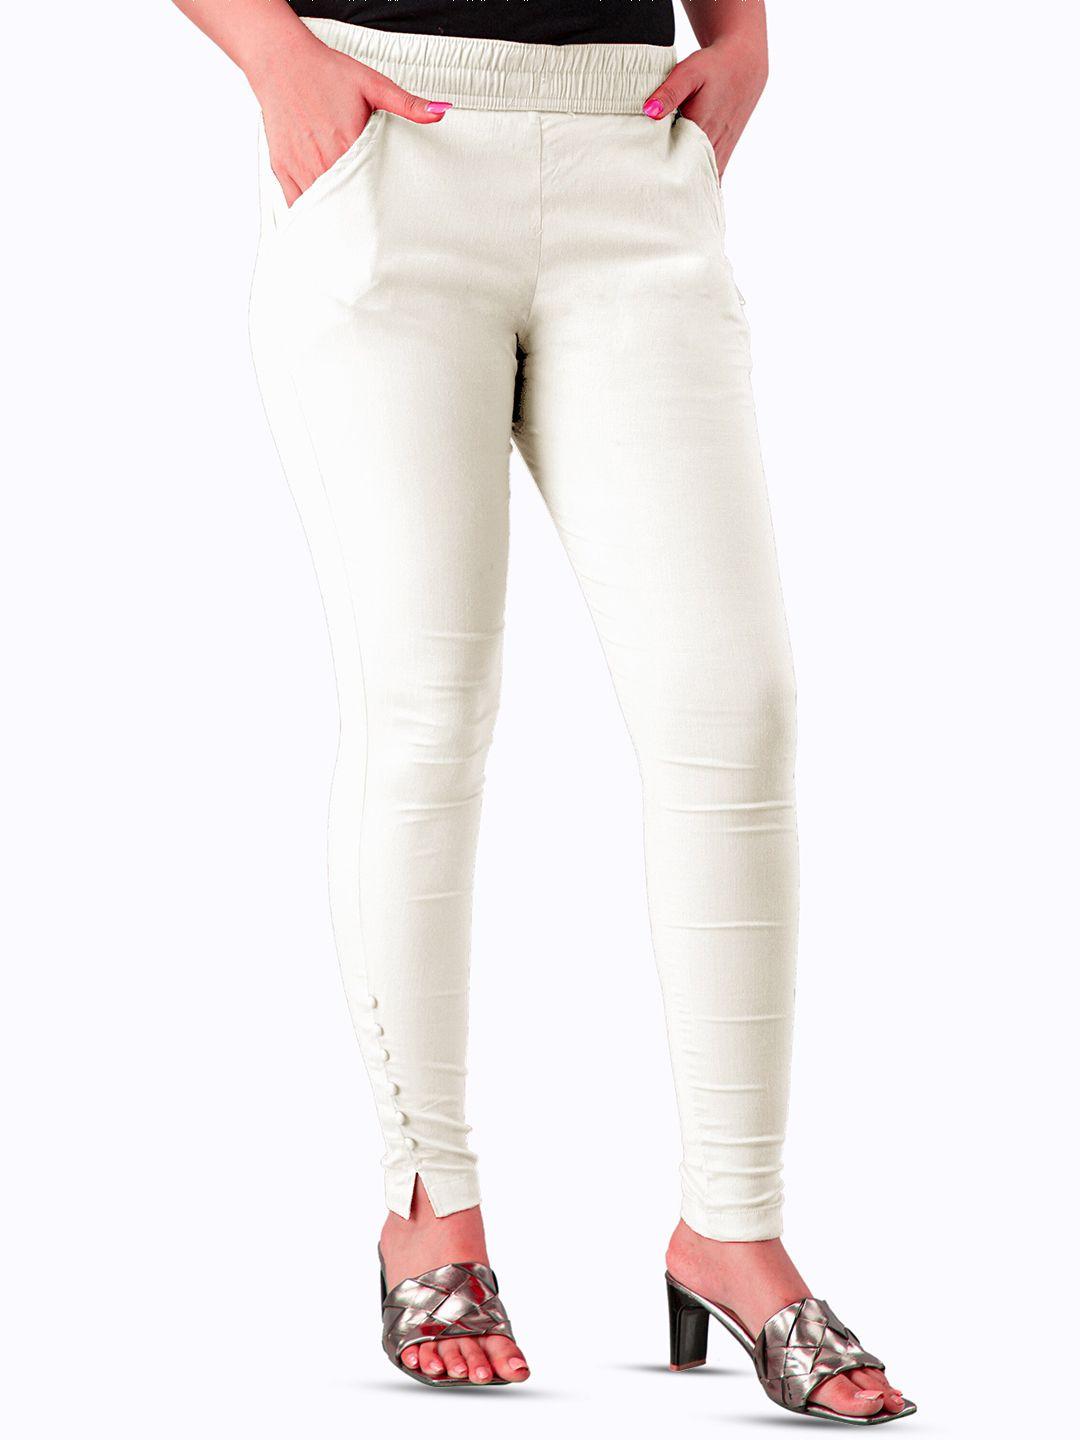 BAESD Women Relaxed Fit Stretchable Jeggings